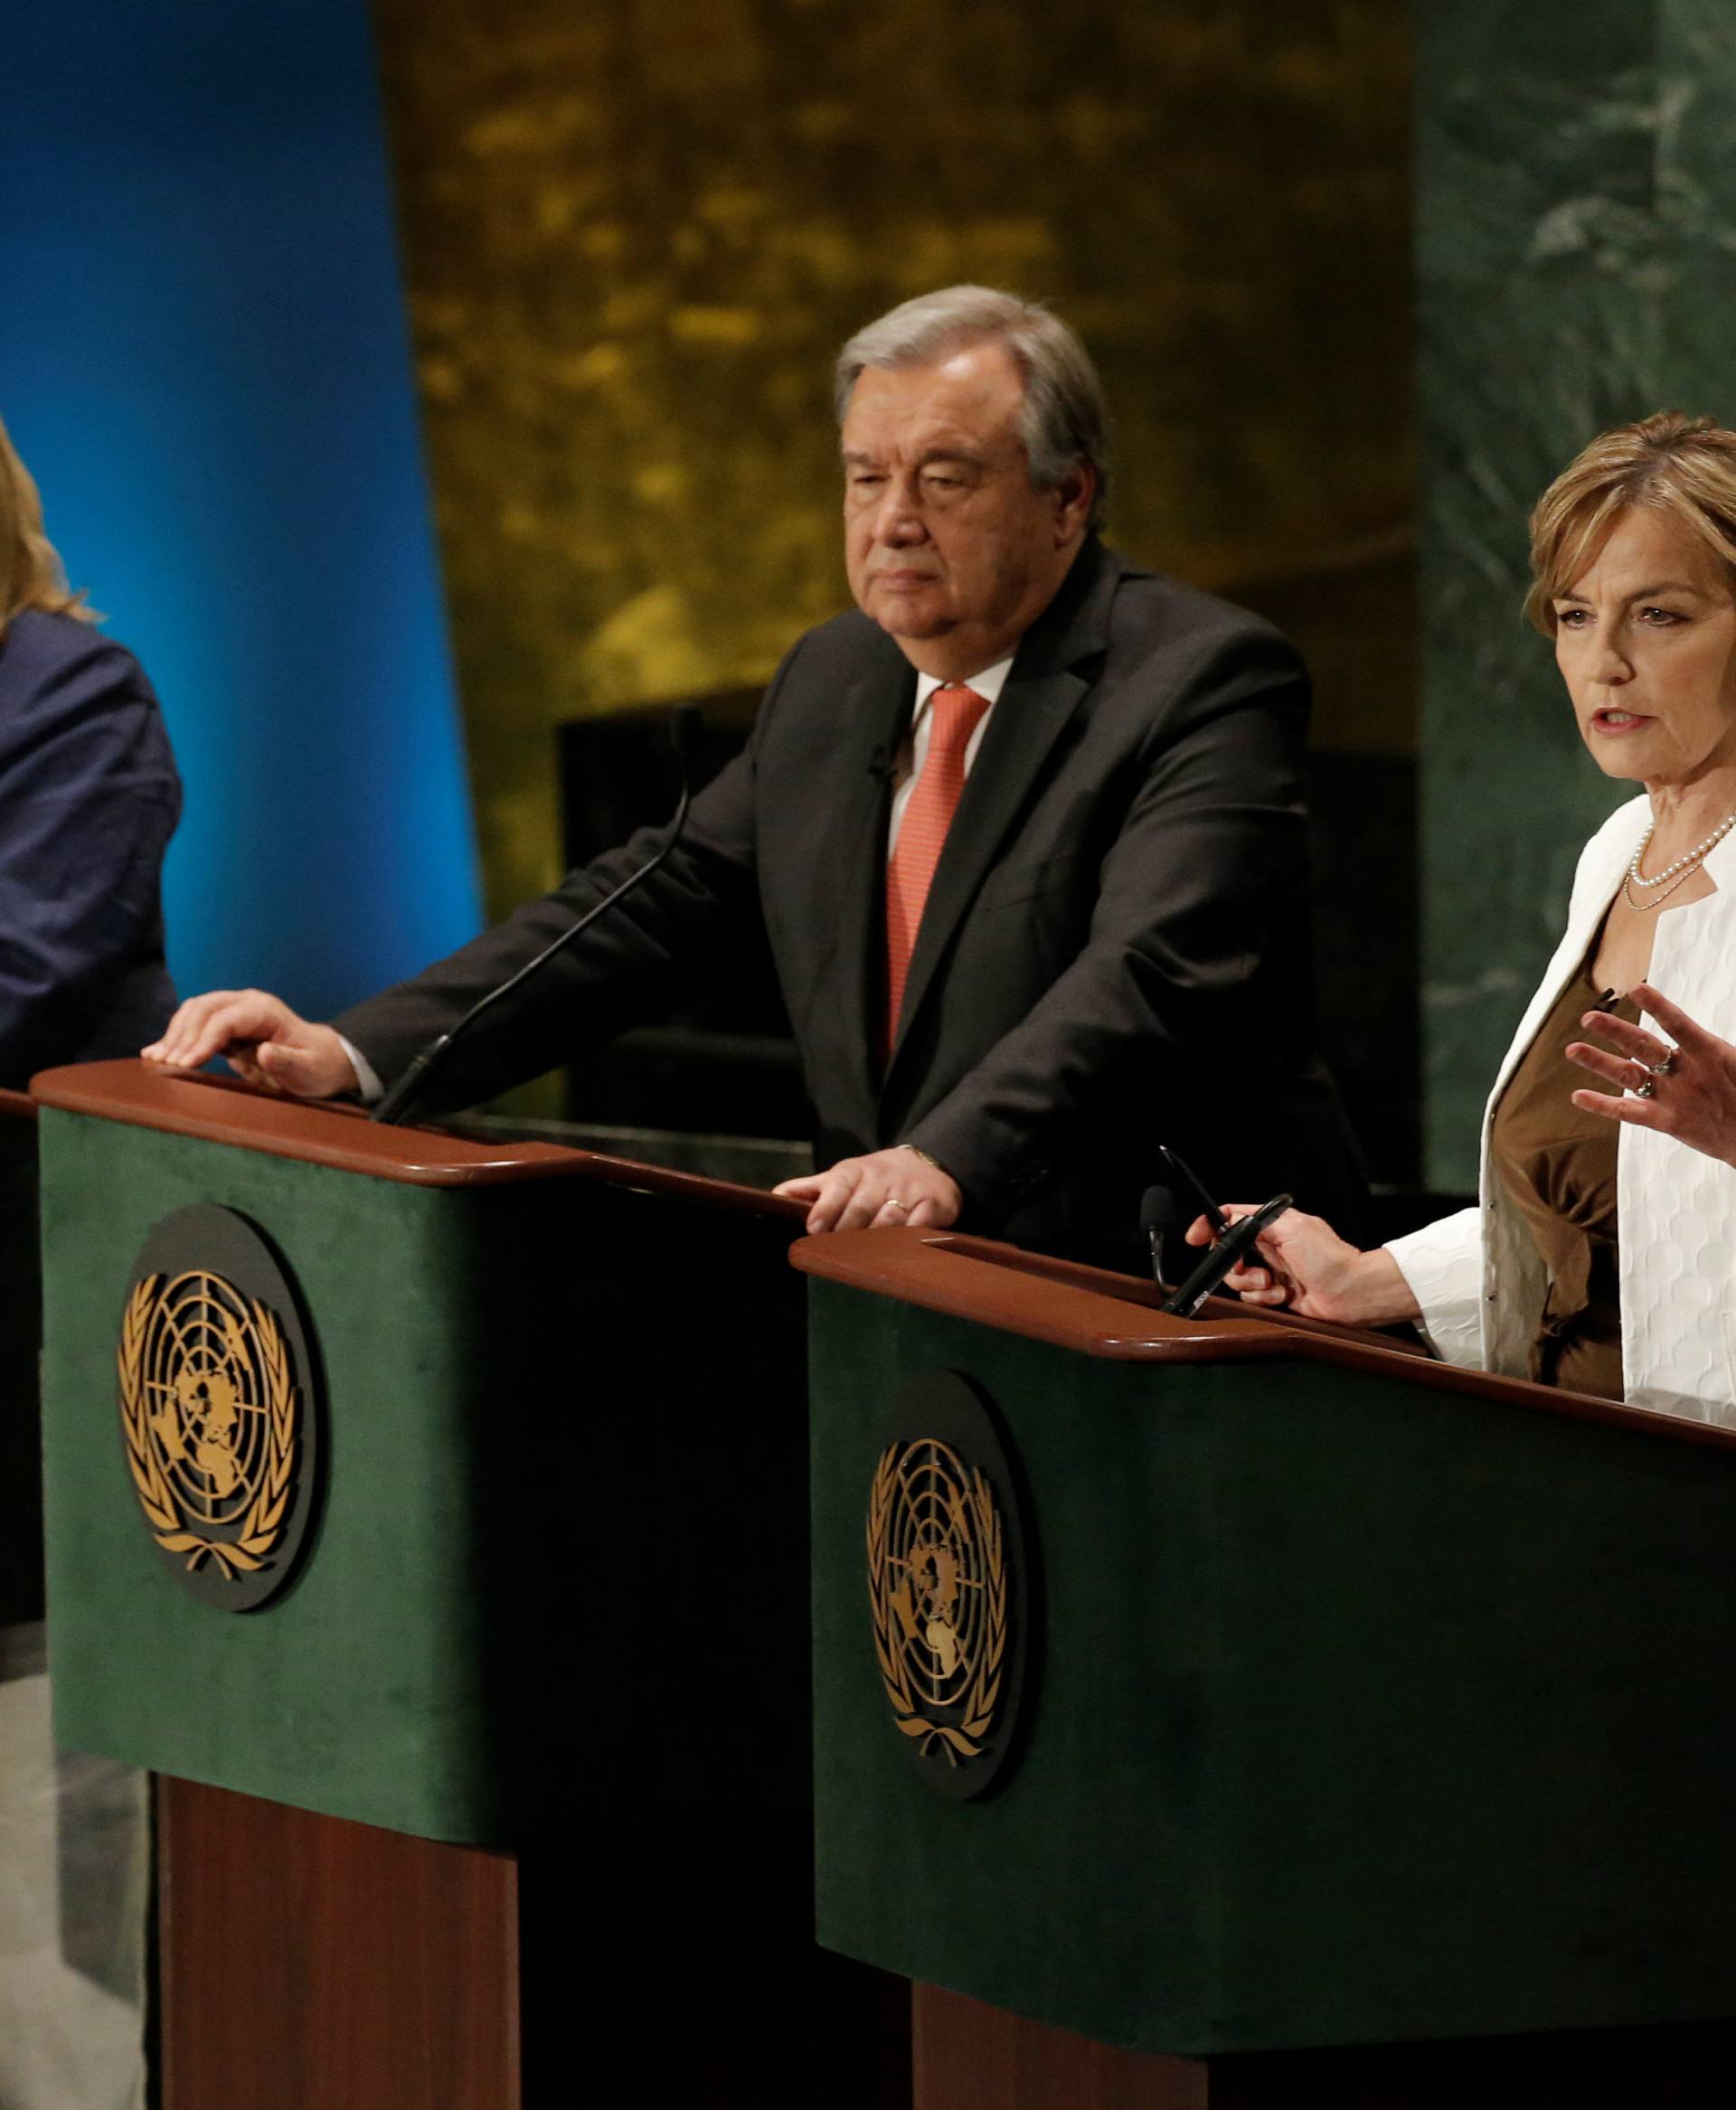 Former Croatian Foreign Minister Vesna Pusic speaks during a debate in the United Nations General Assembly between candidates vying to be the next U.N. Secretary General at U.N. headquarters in New York